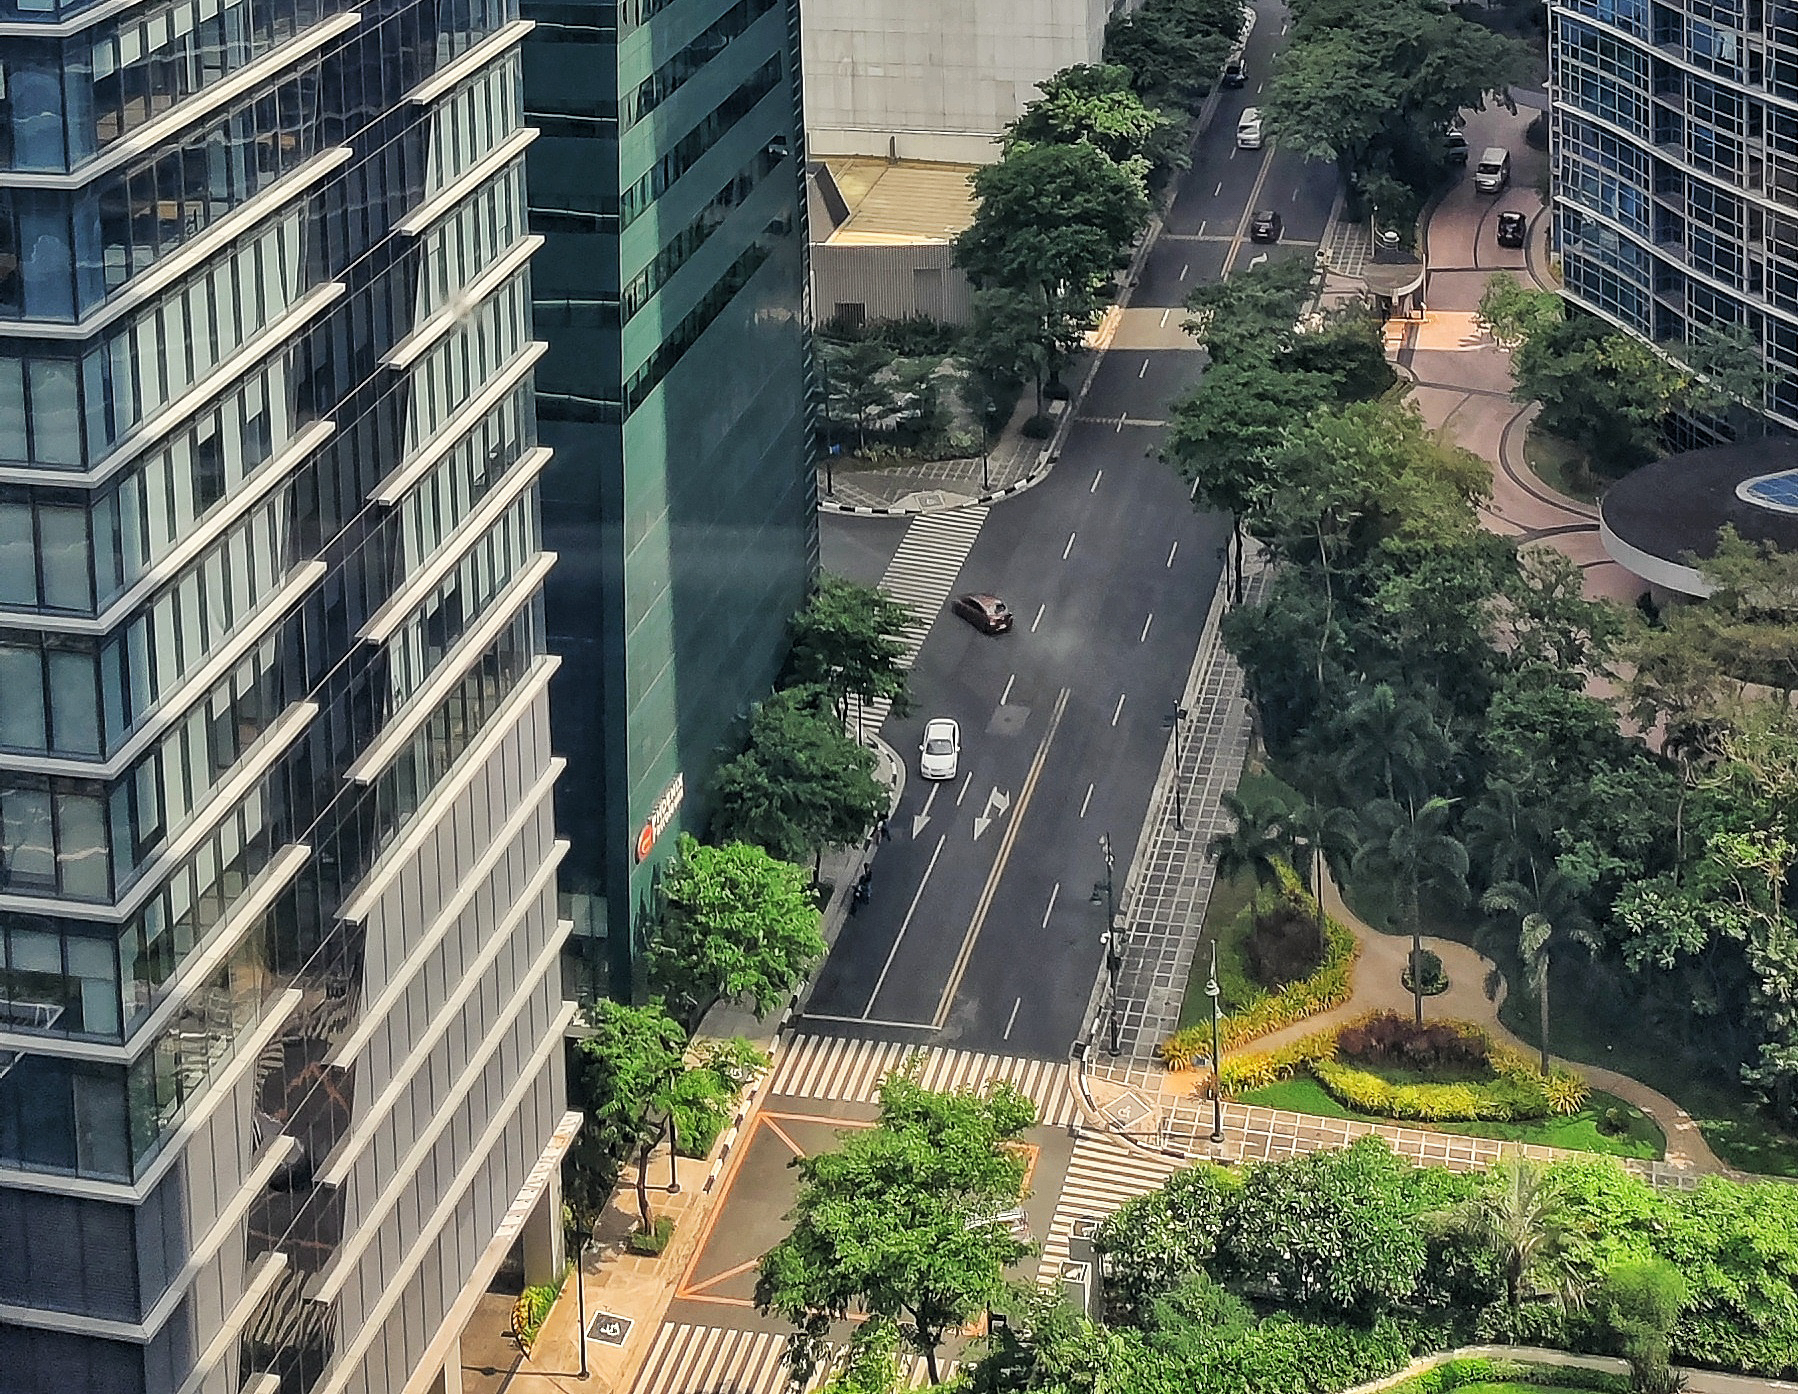 The streets of Bonifacio Global City in Taguig City, one of Metro Manila’s business districts